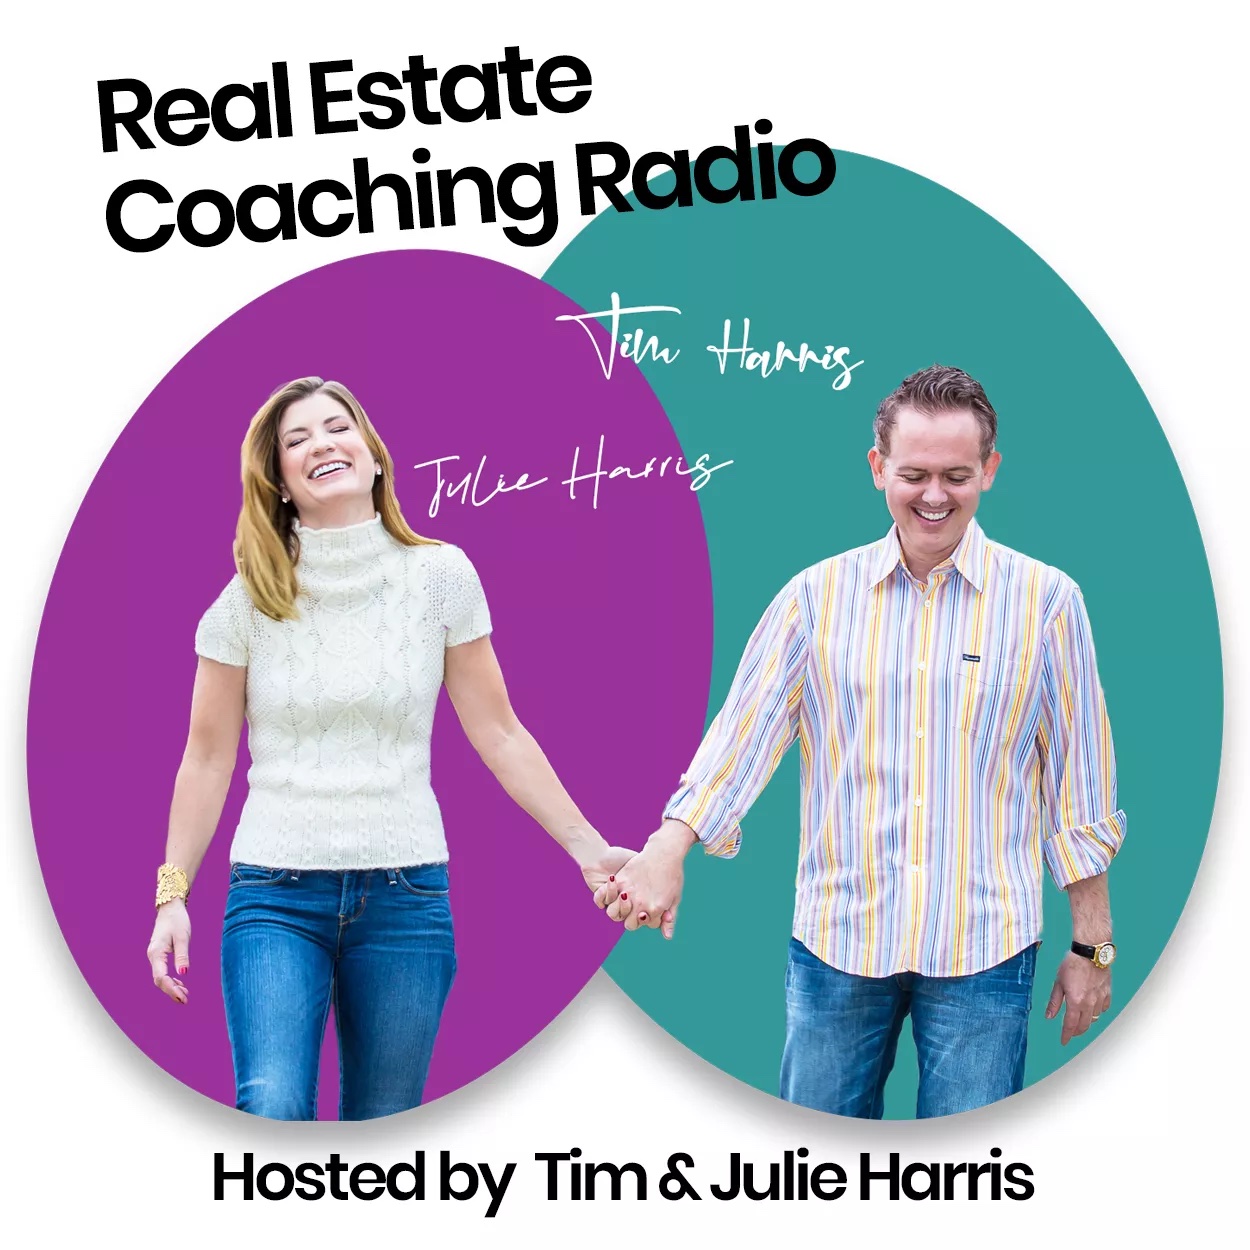 Fresh update on "second story" discussed on Real Estate Coaching Radio